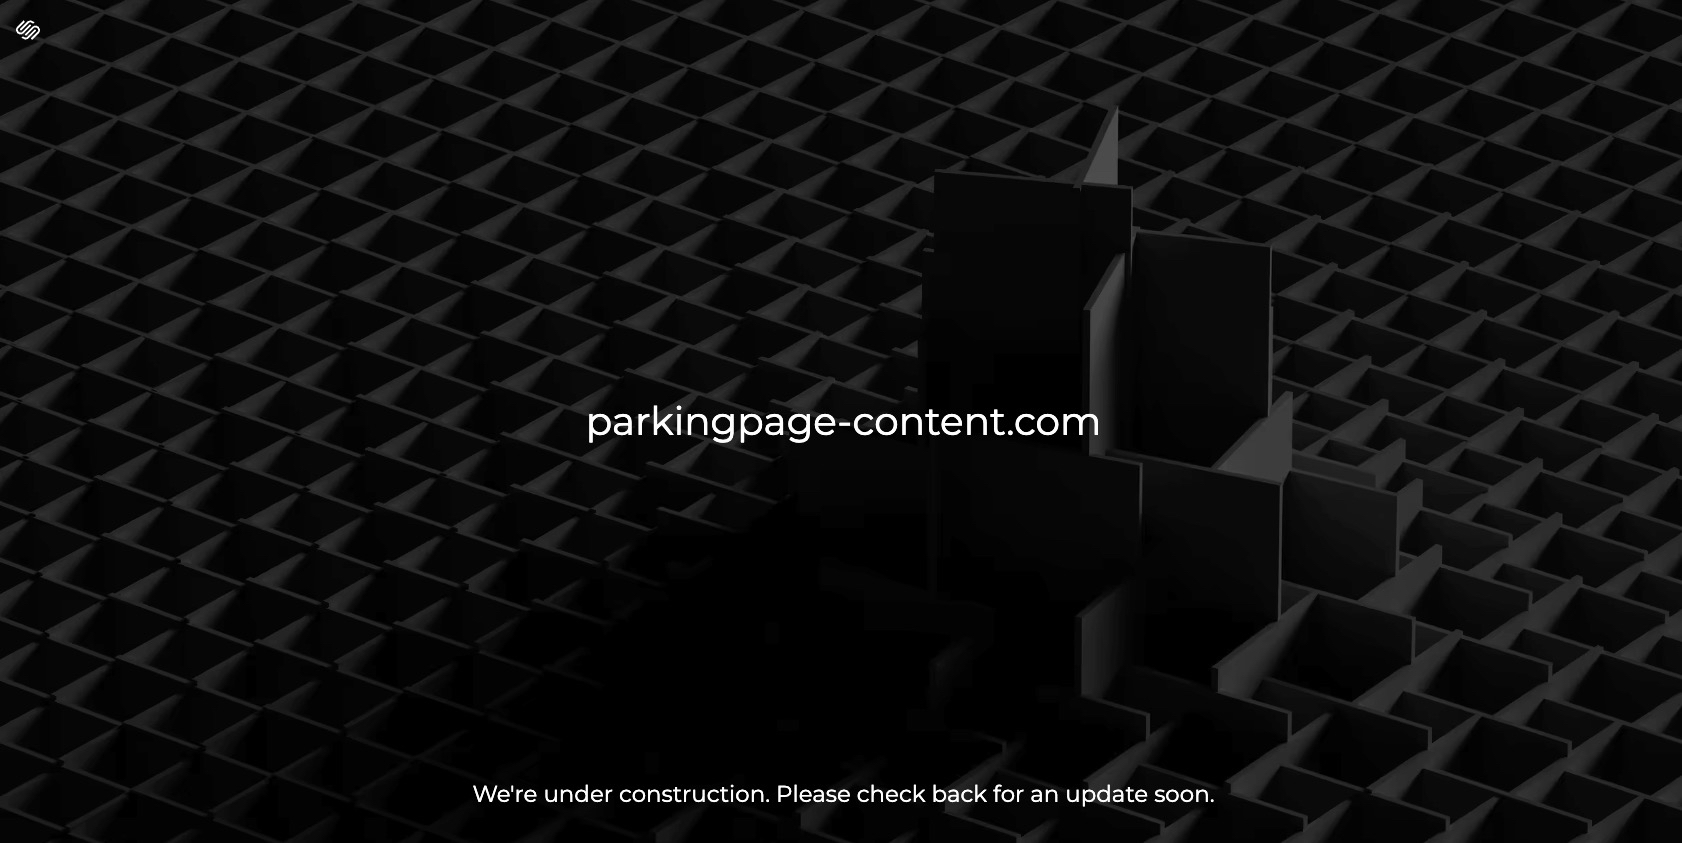 squarespace parking page black baground with domain in white writing.jpeg